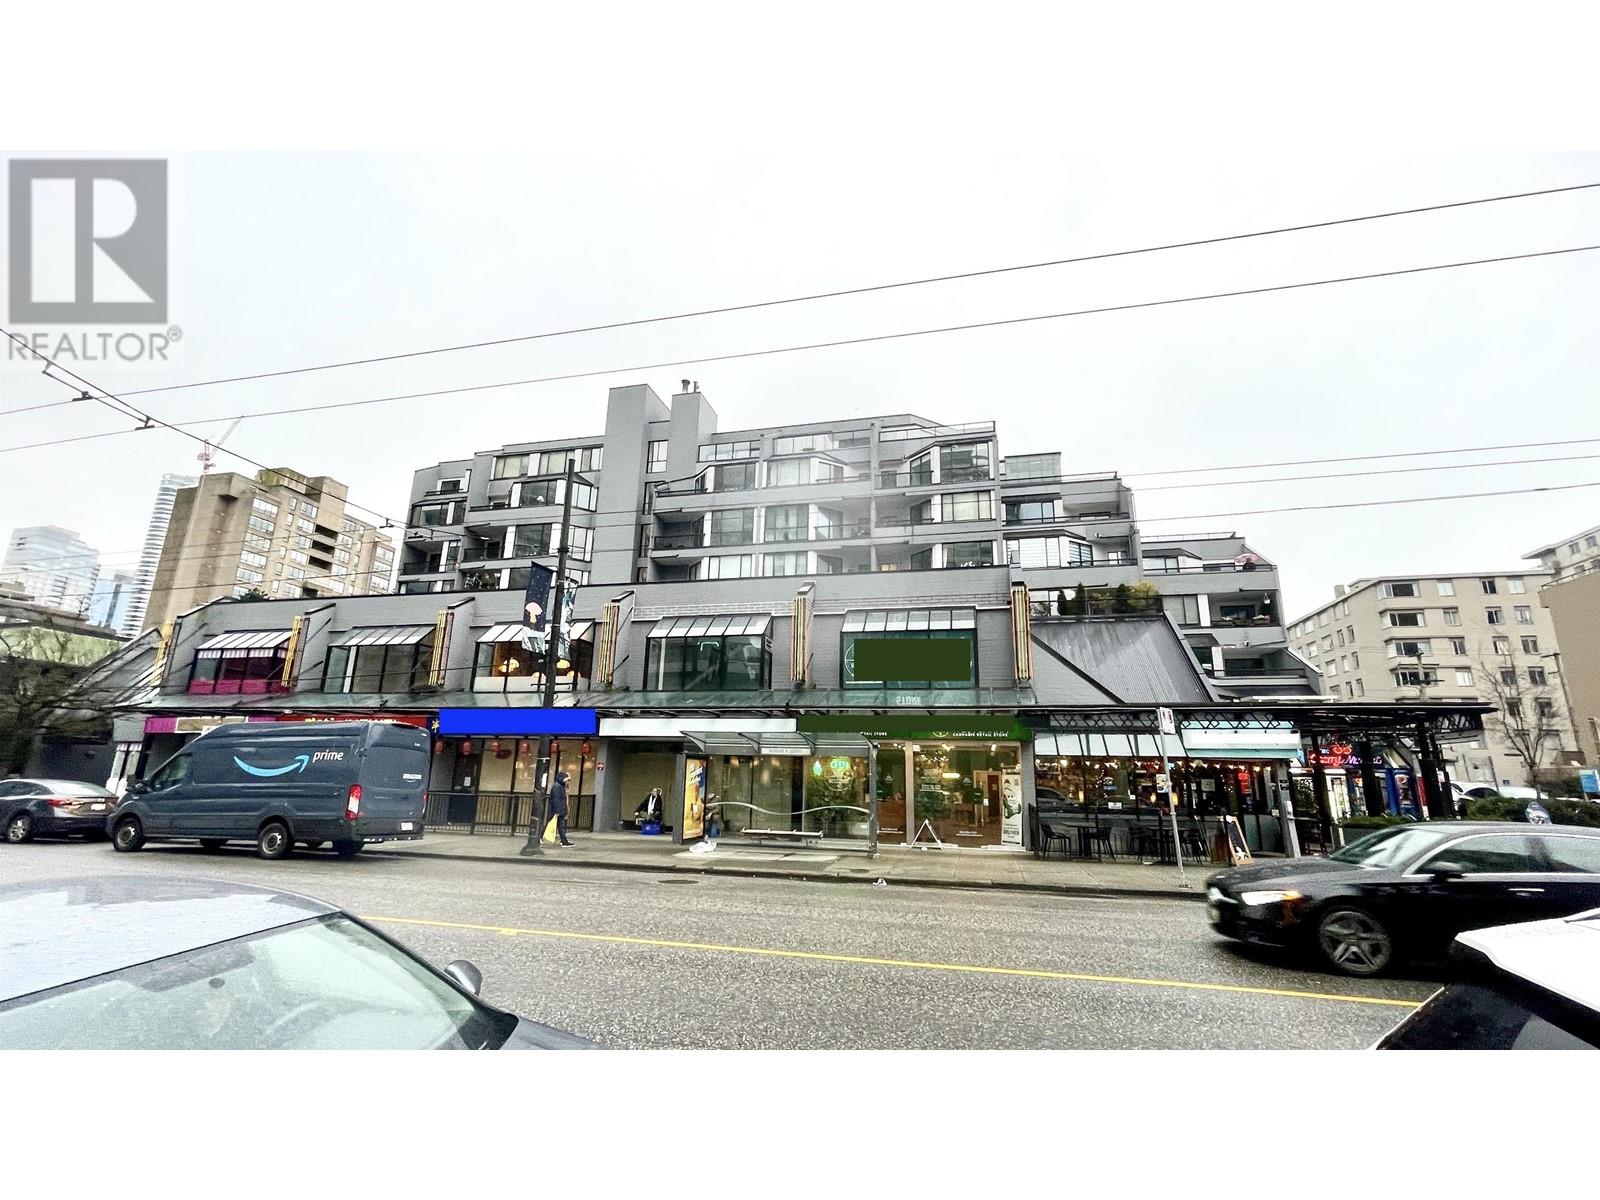 For sale: 1280 ROBSON STREET, Vancouver, British Columbia V6E1C1 - C8058036